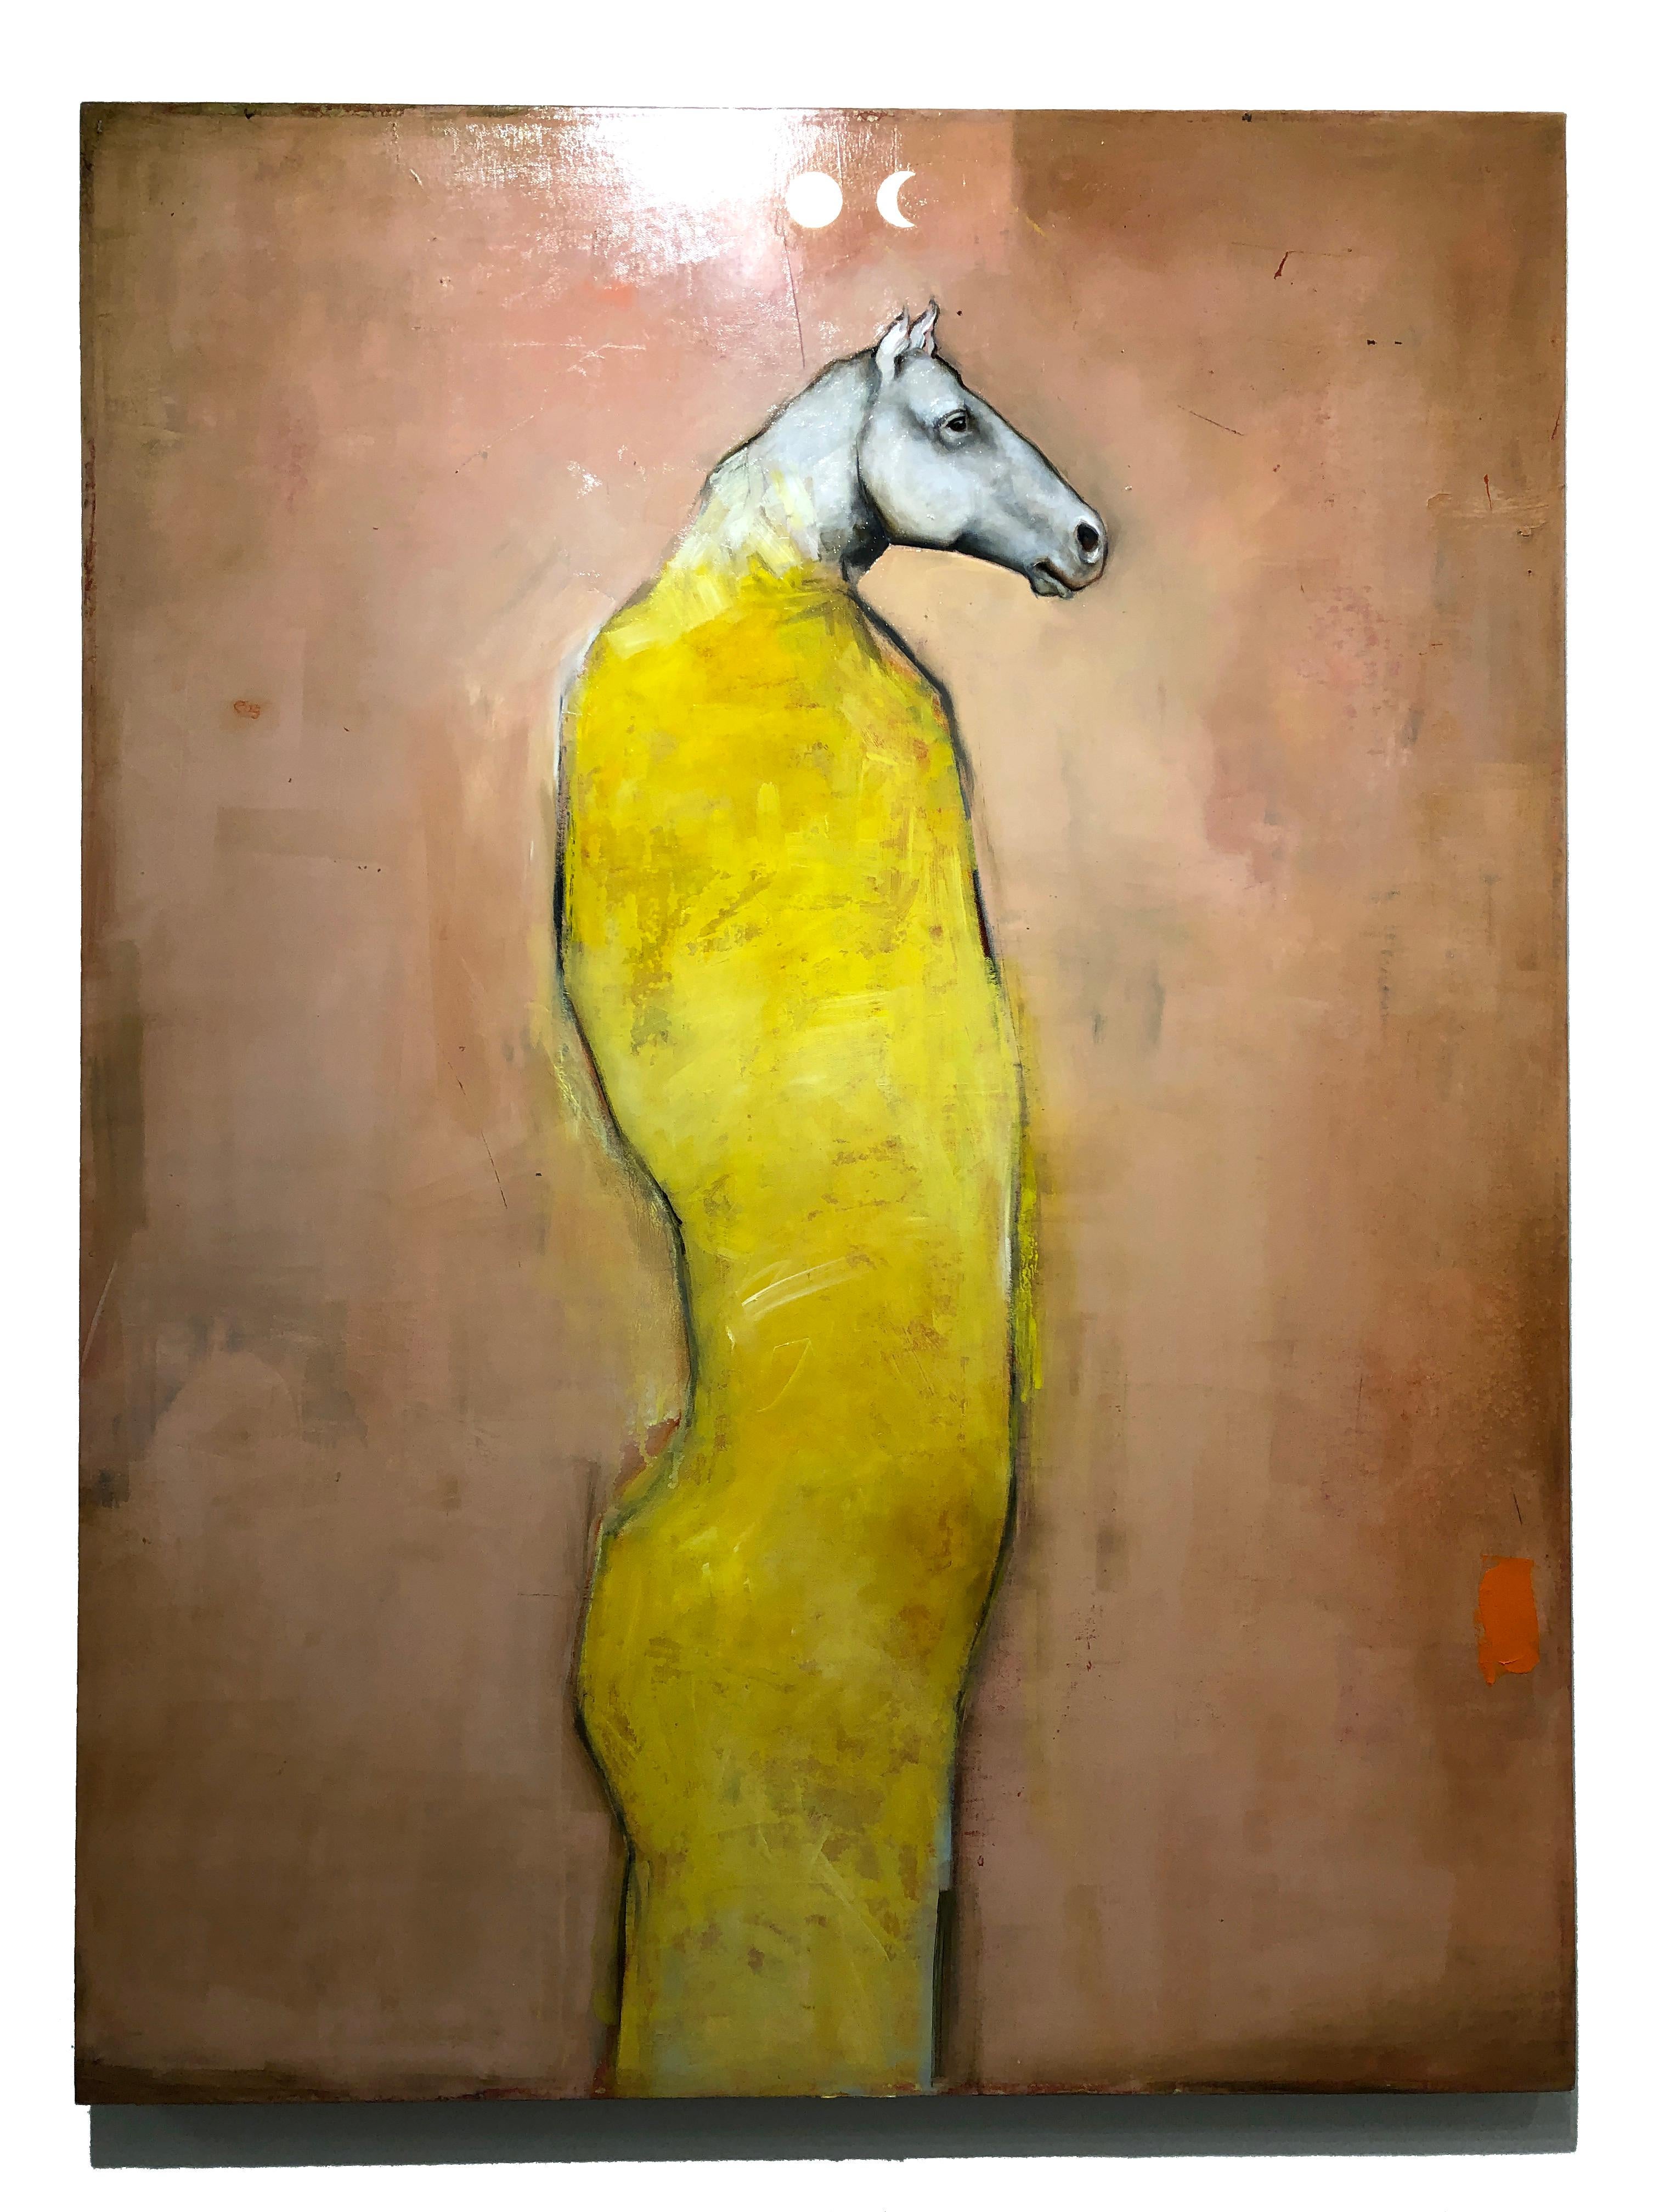 Eos -Mythical horse figure, Oil on canvas, pop contemporary whimsical painting - Painting by Michele Mikesell